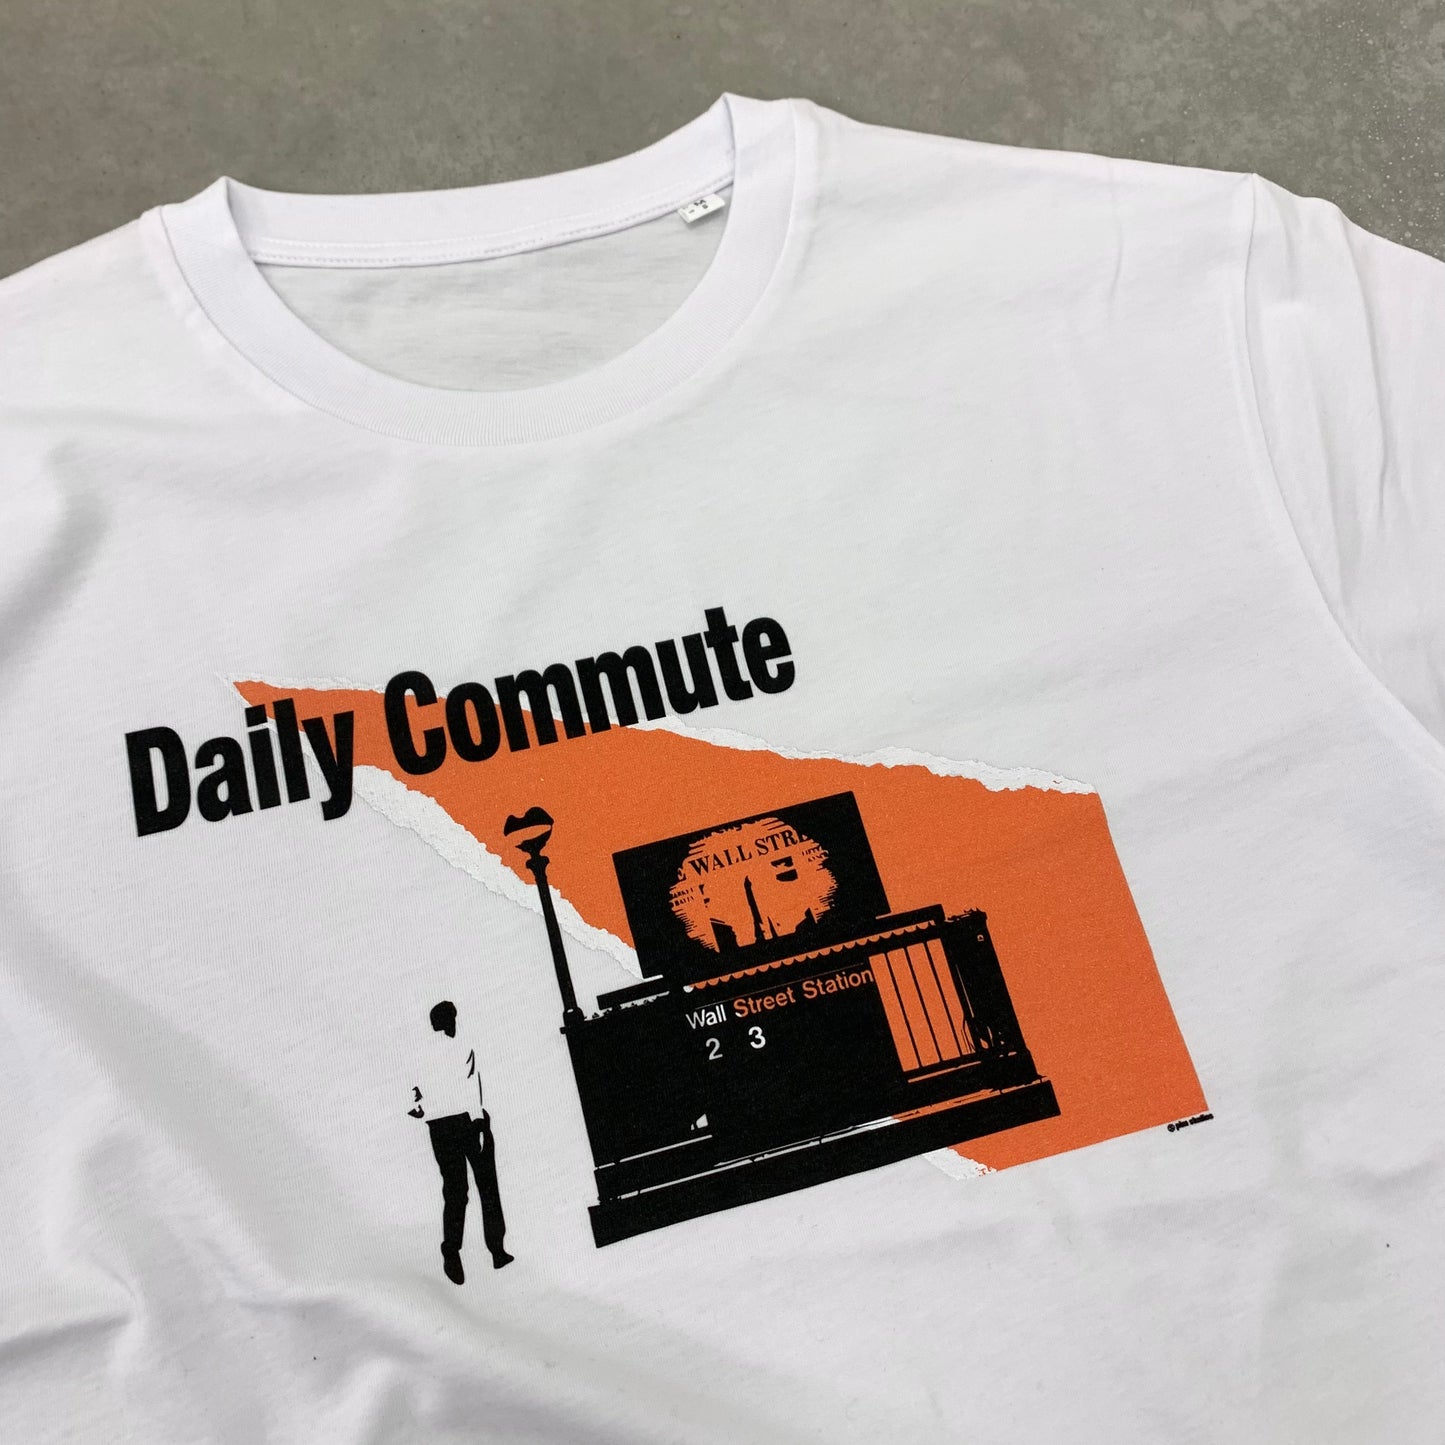 Daily Commute Tee